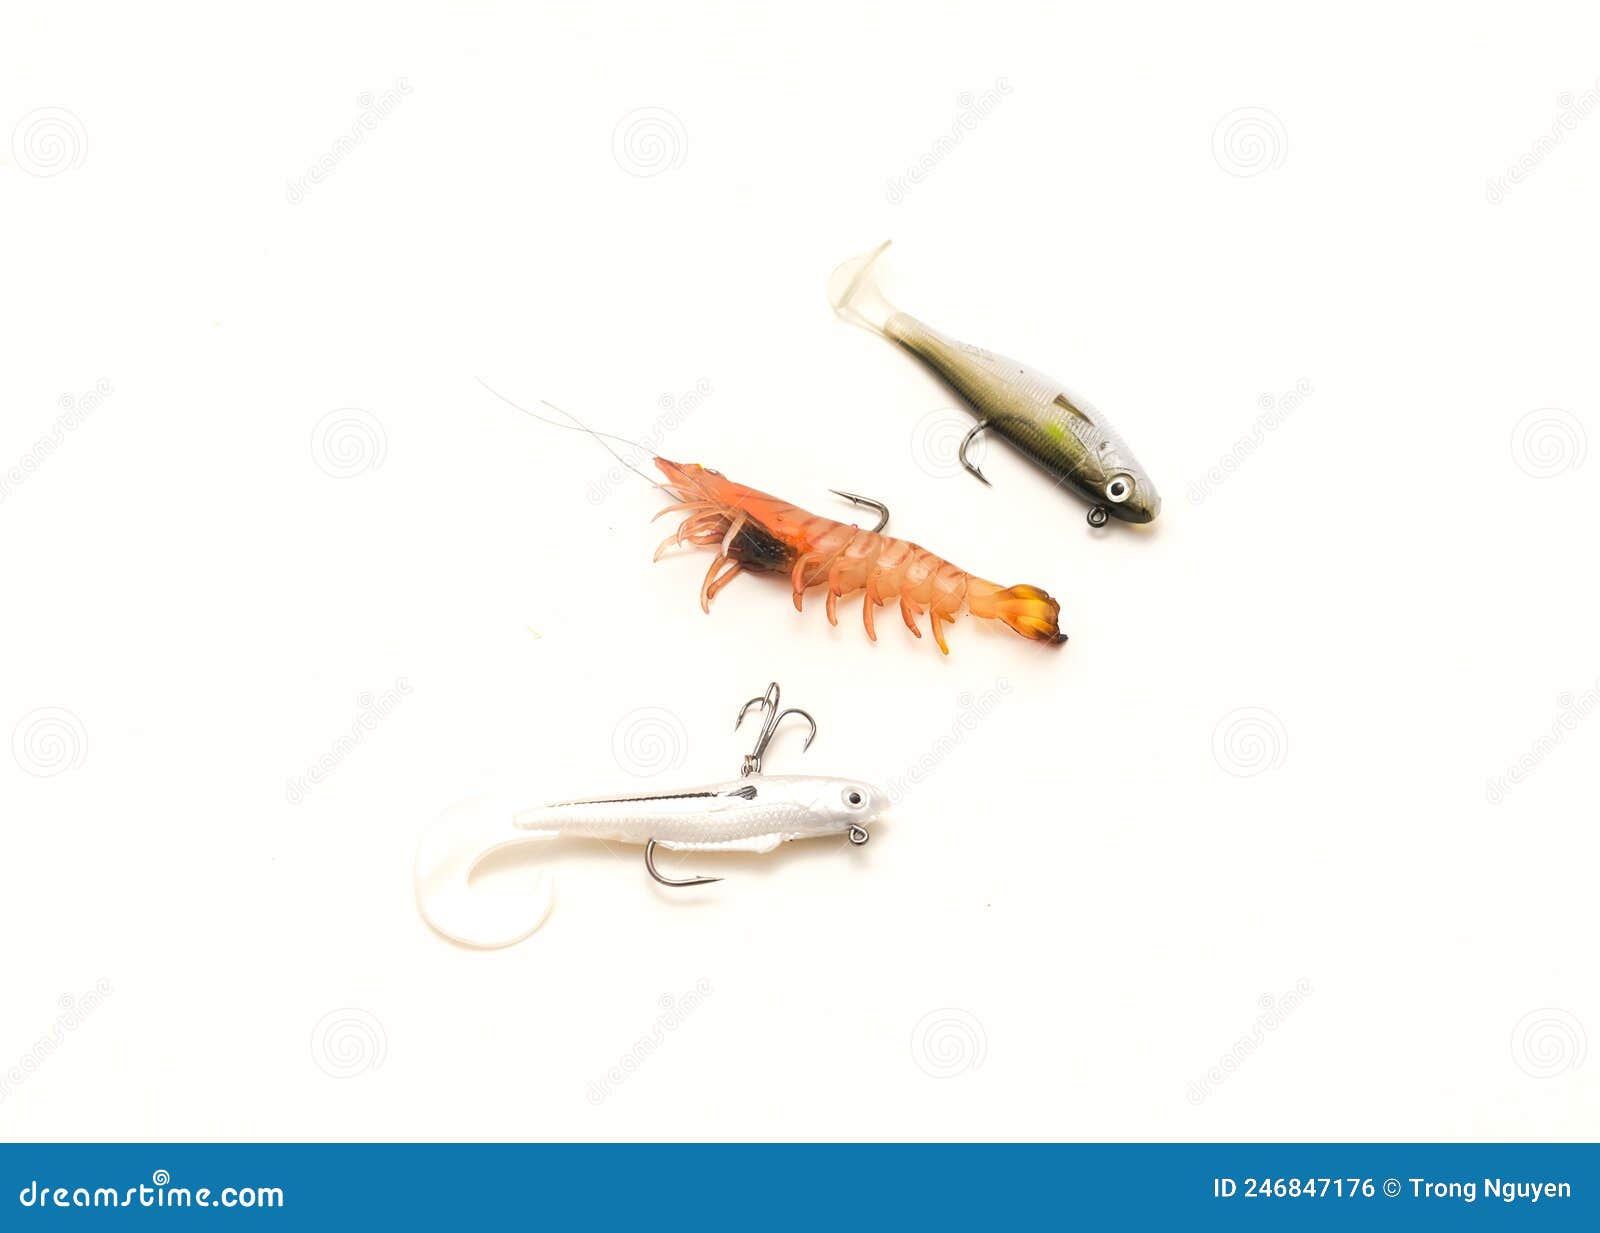 Three Jig Head Soft Swimbait, Paddle Tail and Shrimp Lure Isolated